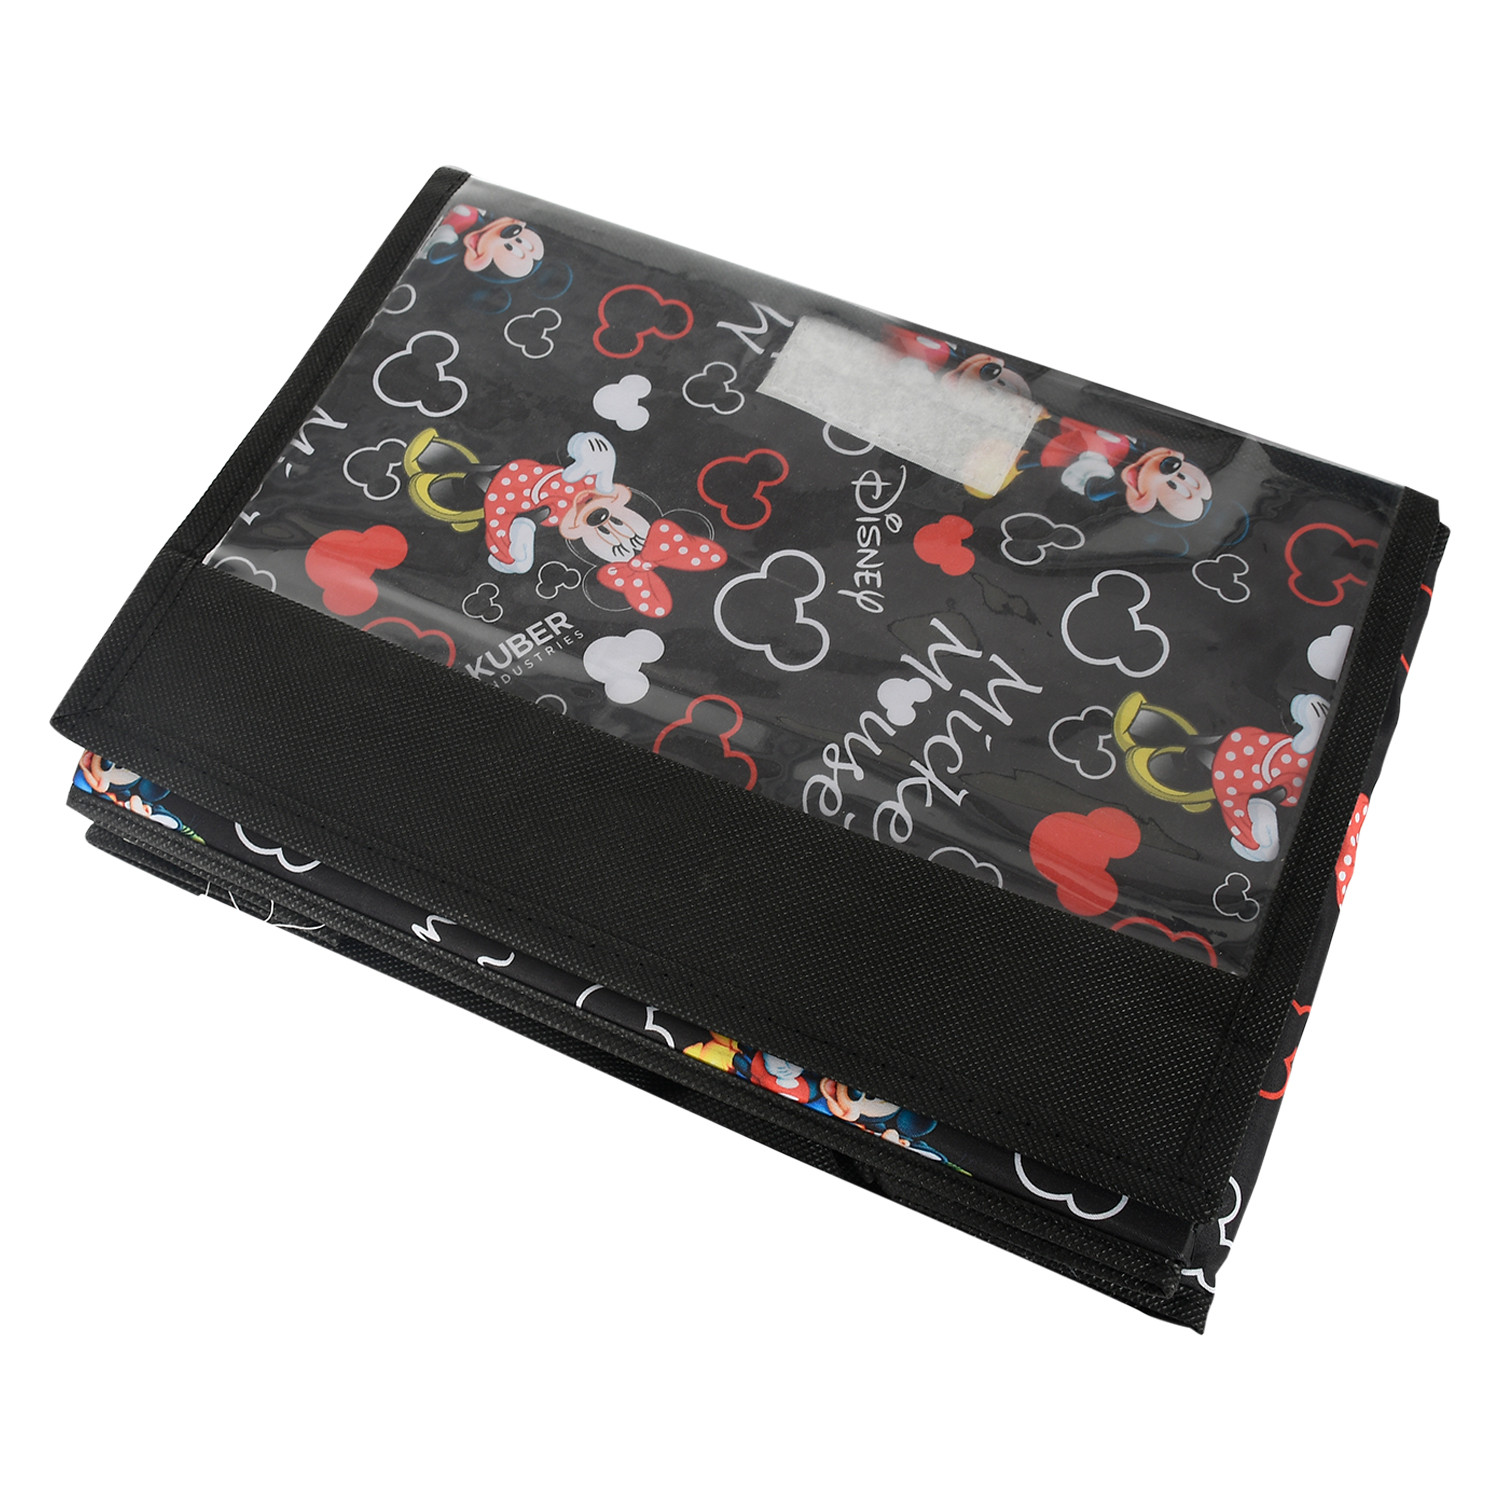 Kuber Industries Disney Minnie Storage Box|Non-Woven Foldable Small Storage Organizer for Toys|Cloths with Transparent Lid & Handle (Black)